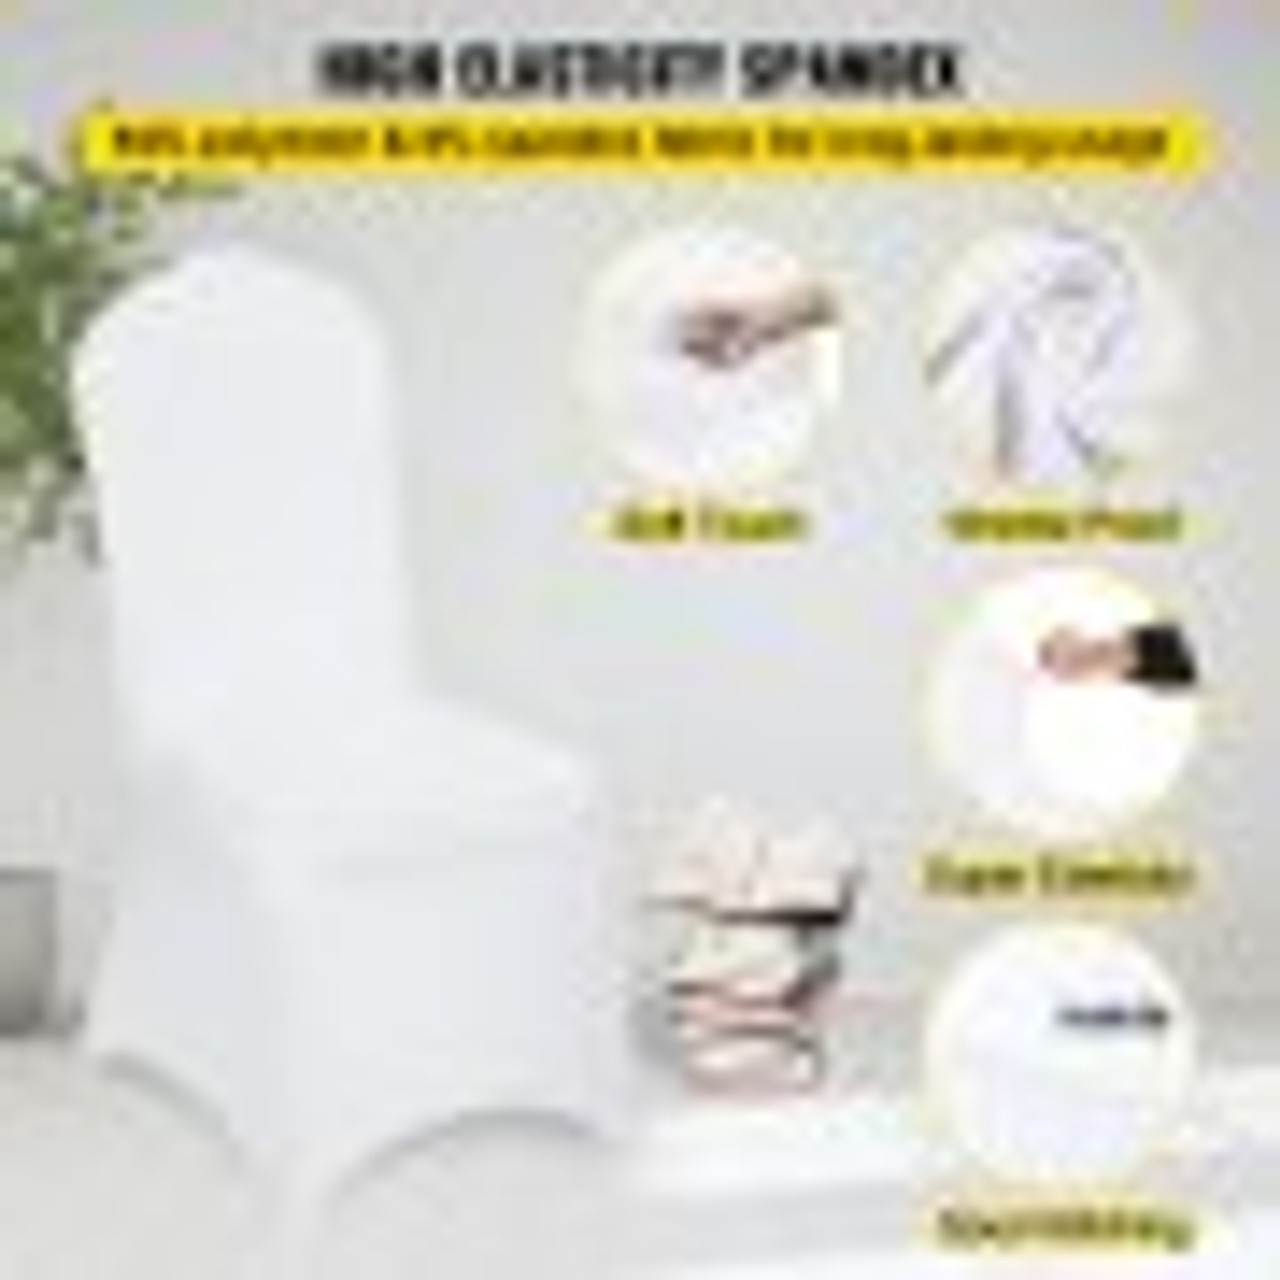 150 Pcs White Chair Covers Polyester Spandex Chair Cover Stretch Slipcovers for Wedding Party Dining Banquet Flat-Front Chair Cover